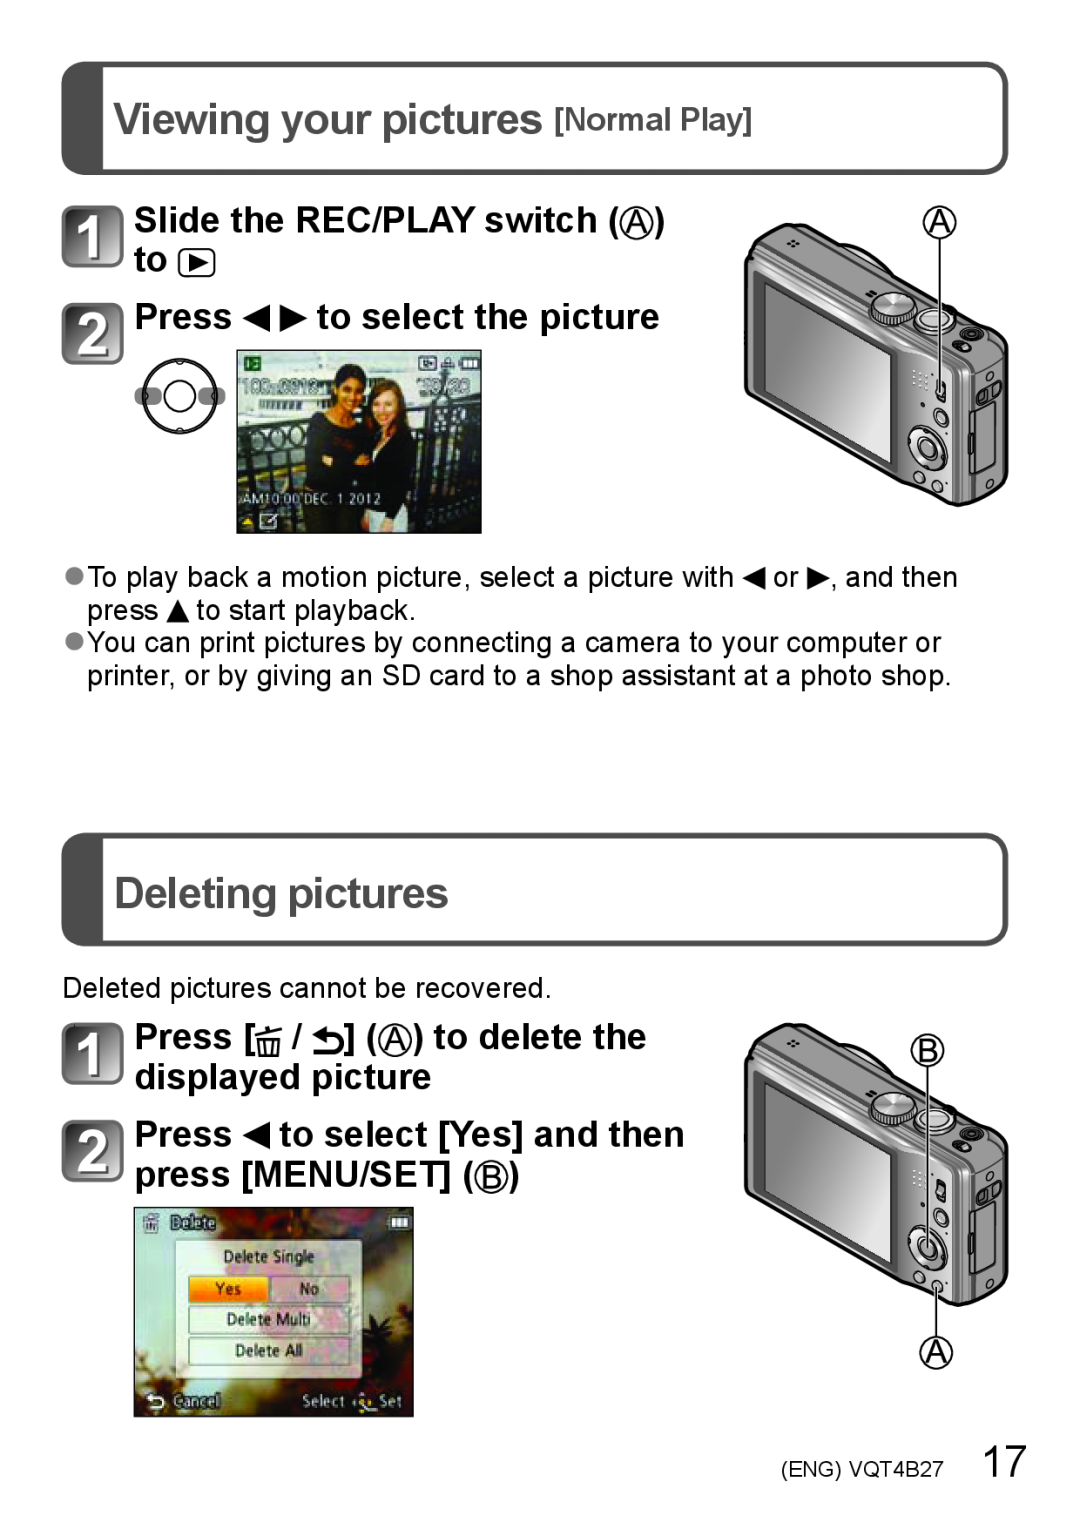 Panasonic M1211KZ0, DMC-ZS15 Viewing your pictures Normal Play, Deleting pictures, Press / to delete the displayed picture 